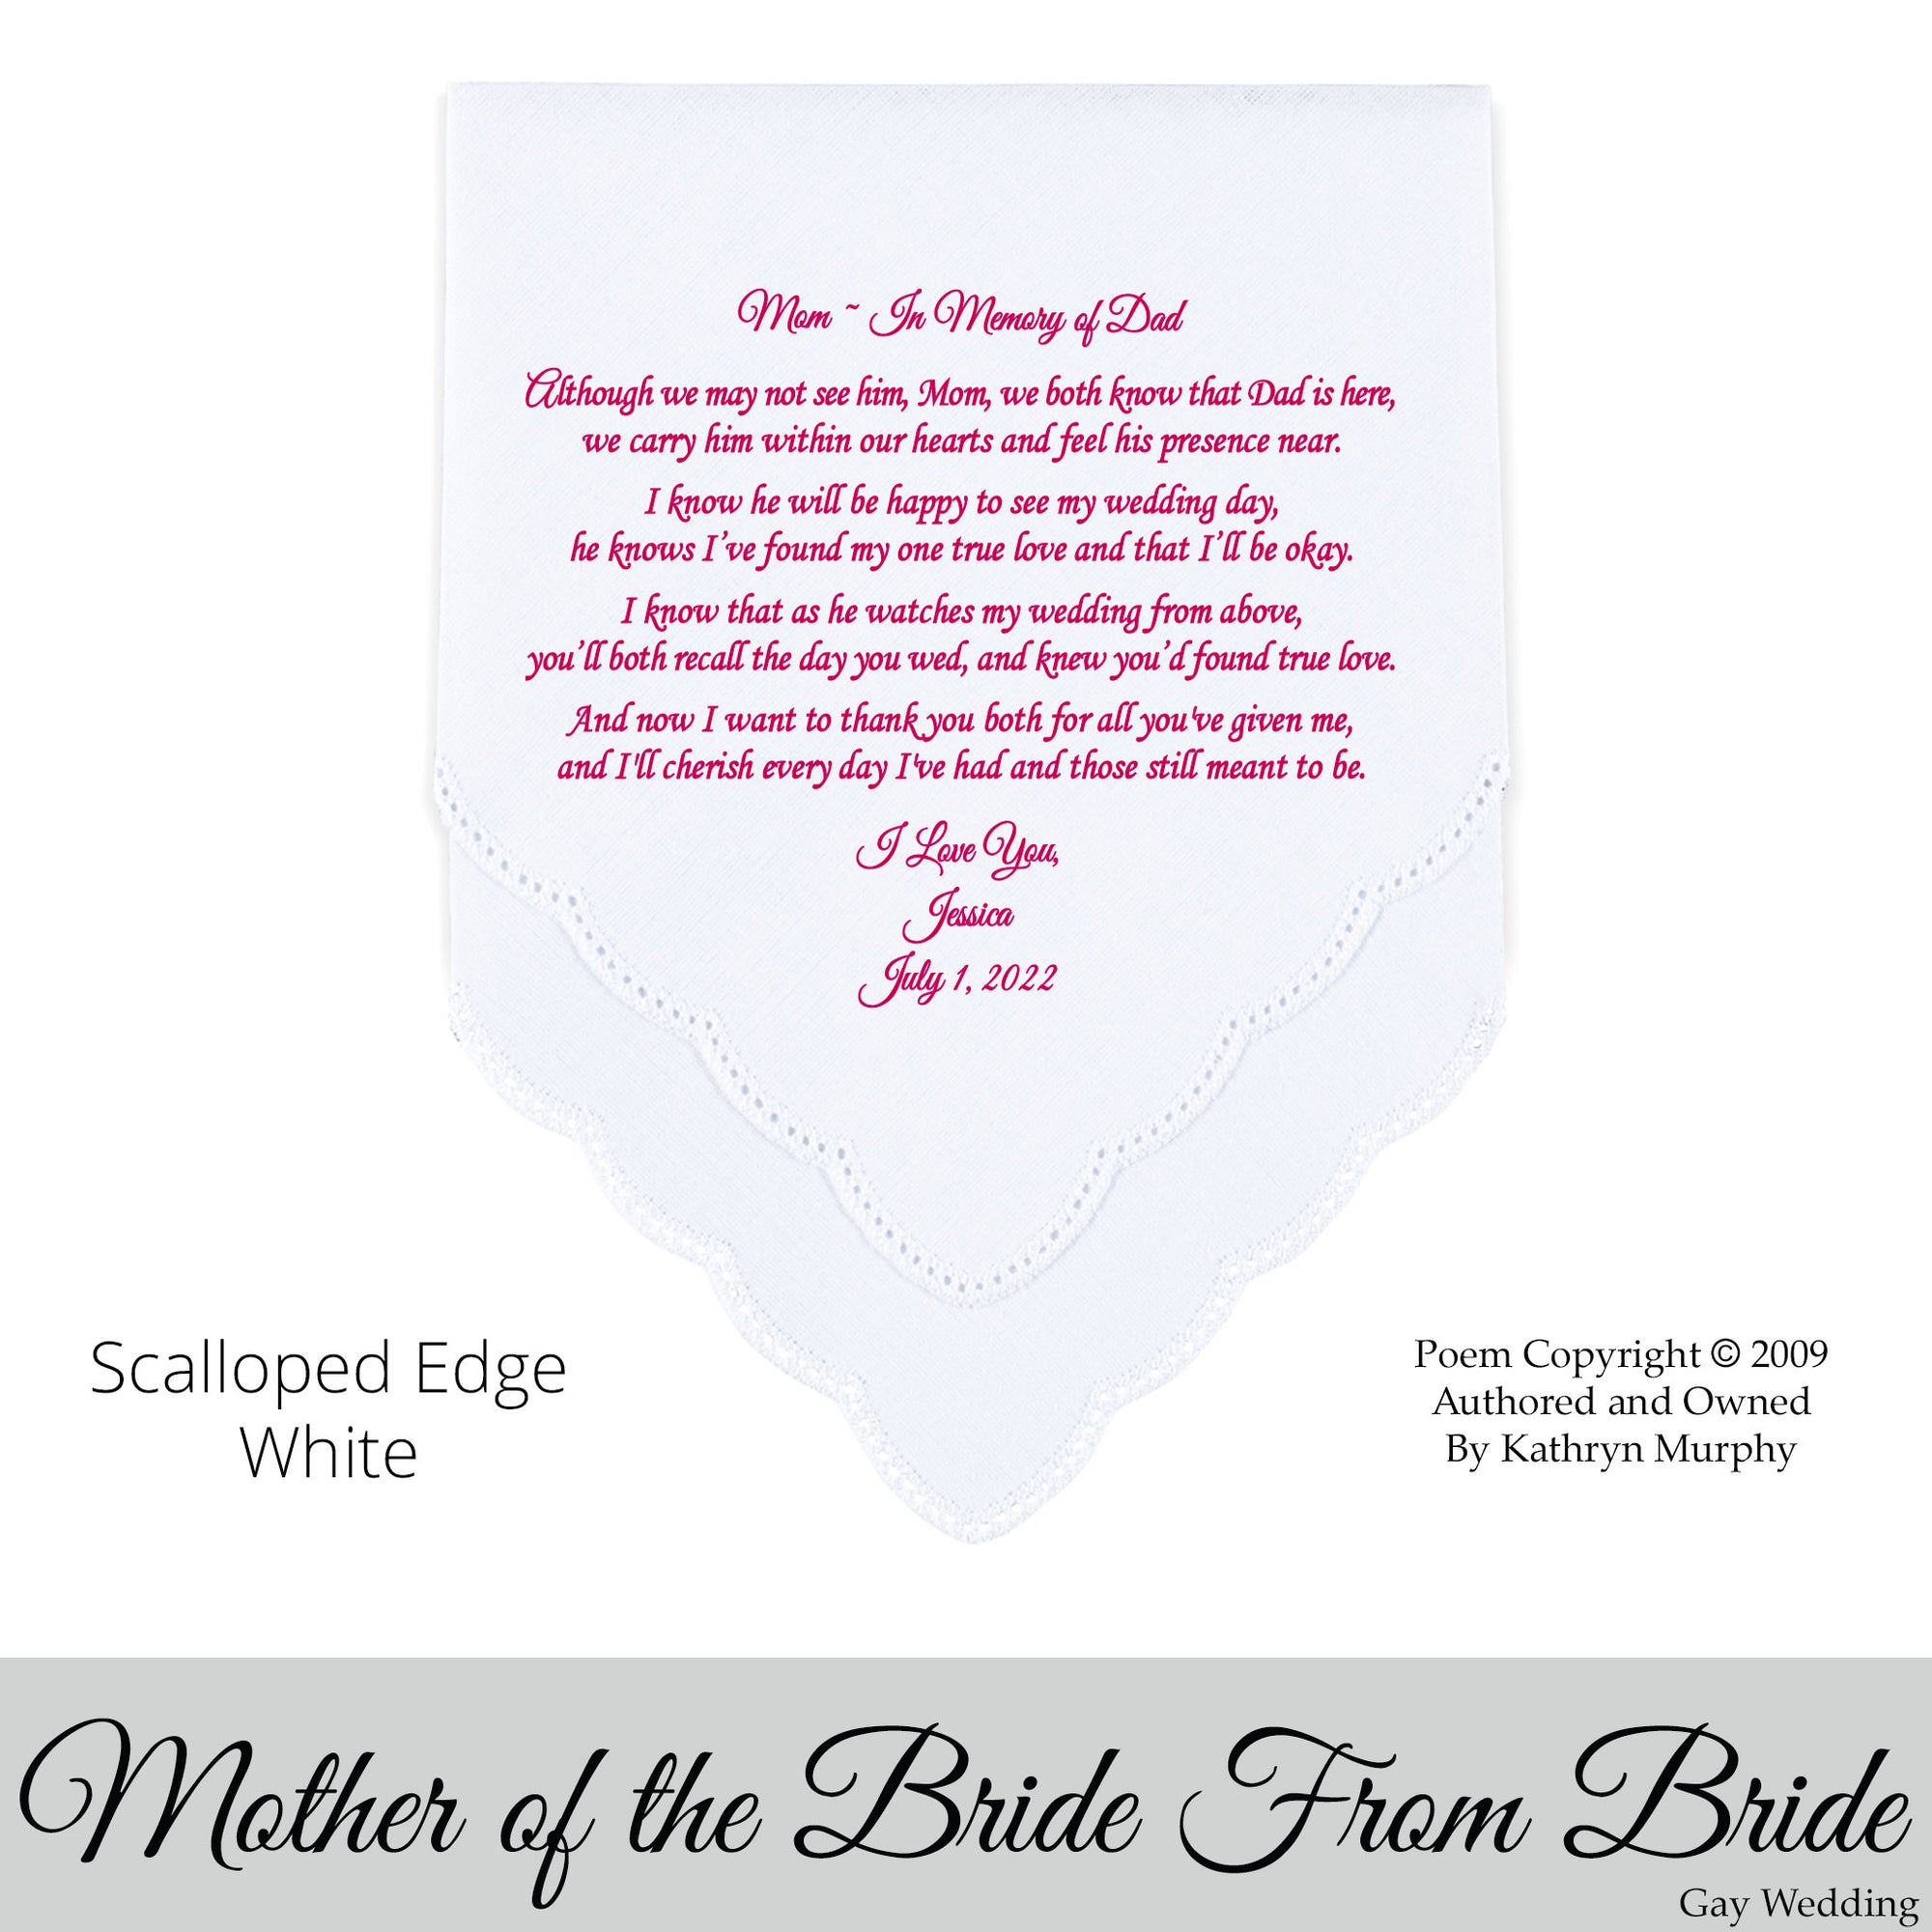 Gay Wedding Gift for the mother of the bride poem printed wedding hankie